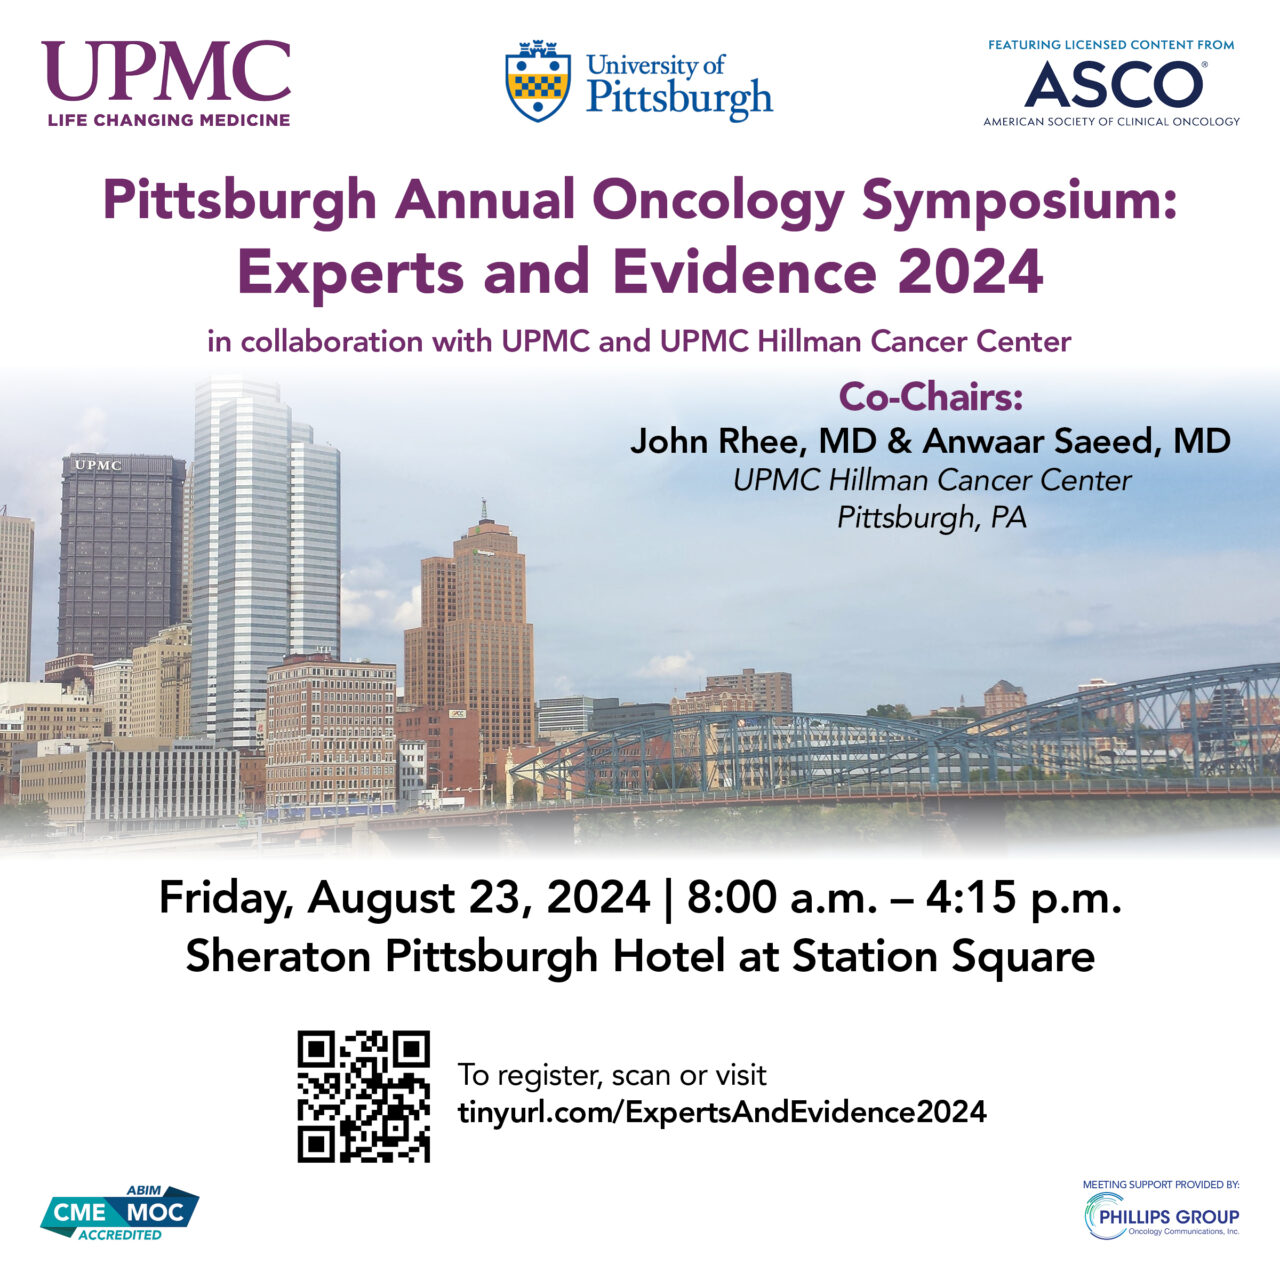 Stephen Liu: Looking forward to discussing Targeted Therapy in NSCLC at the UPMC Hillman Cancer Center Pittsburgh Annual Oncology Symposium